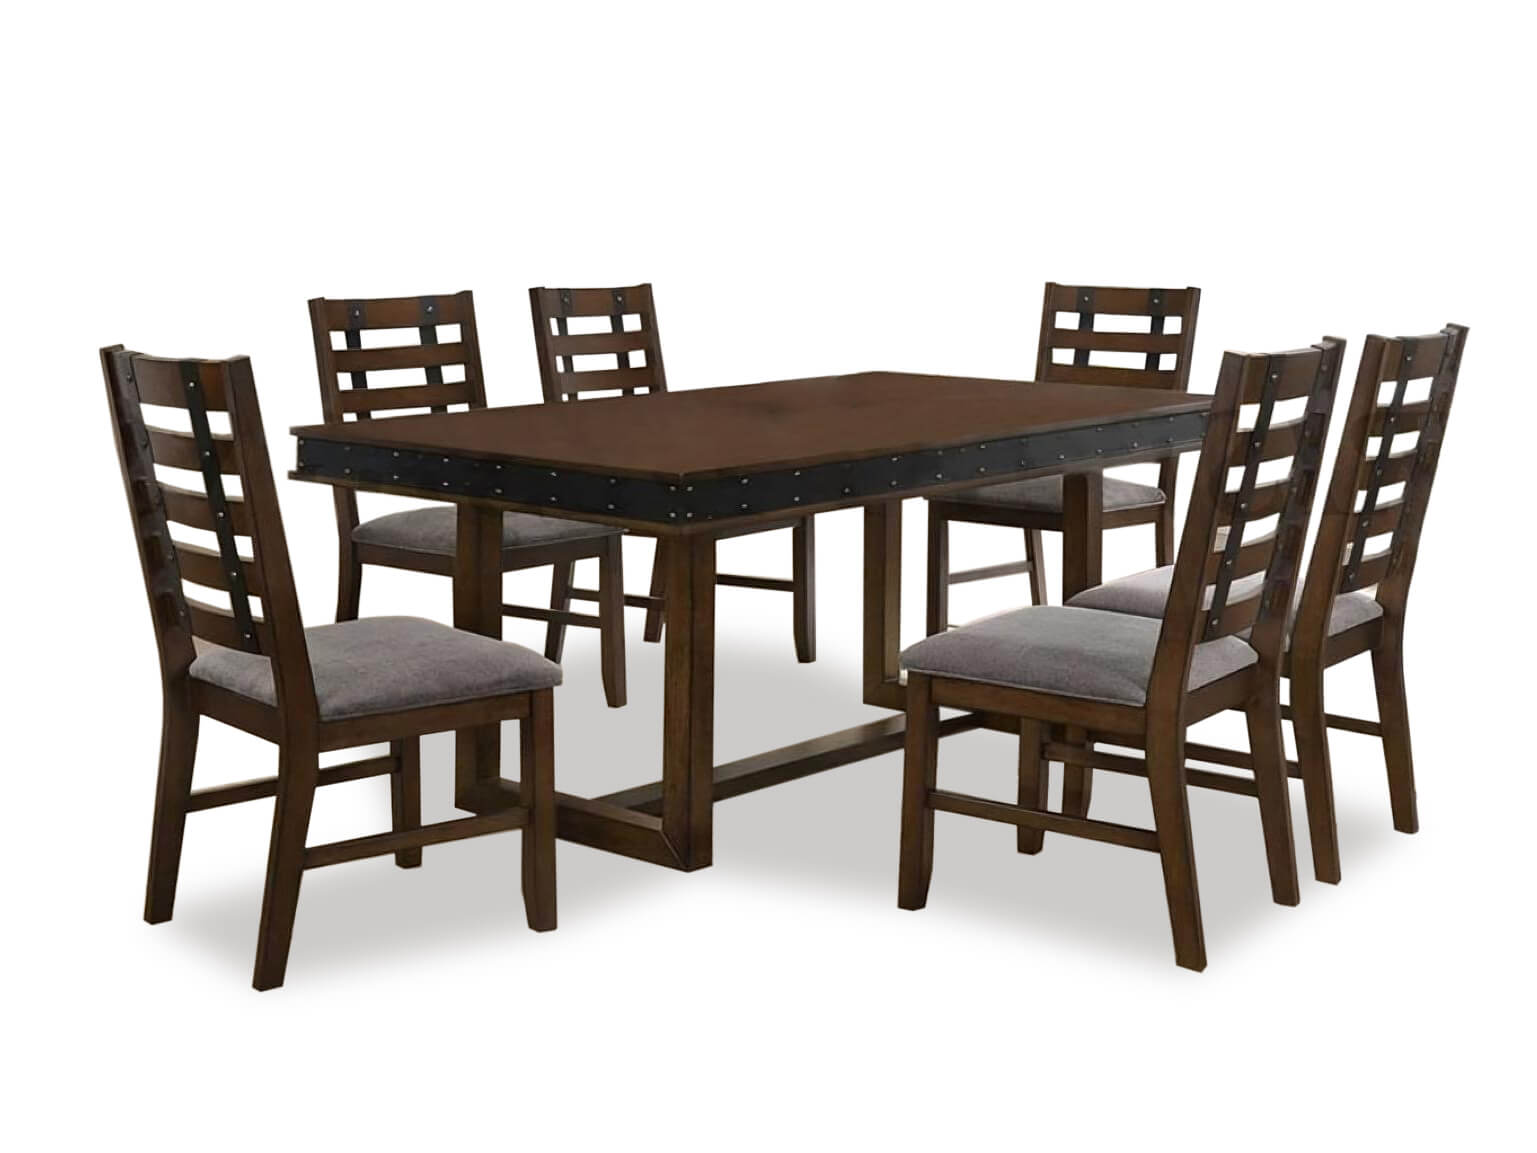 Thronos solid wood dining set - Lux Furniture